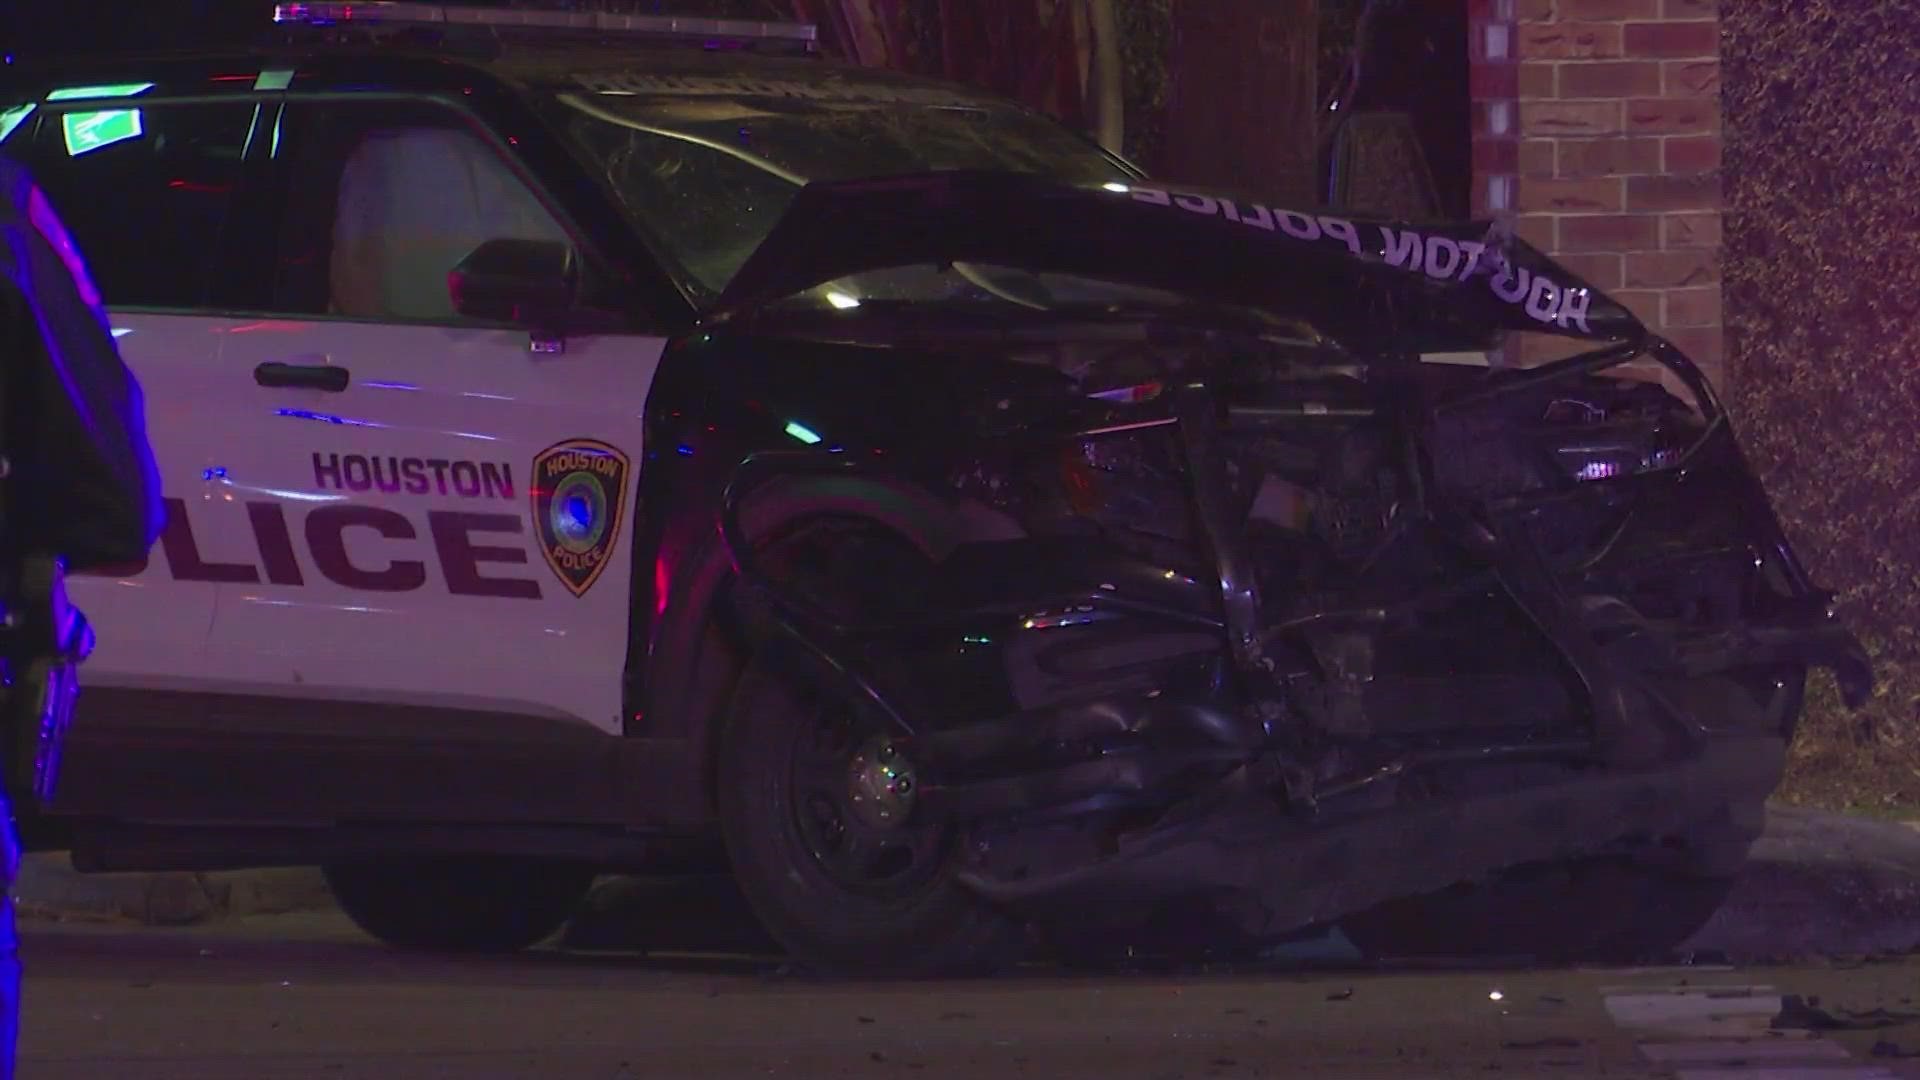 A police officer was hurt during a chase in west Houston late Thursday, according to the Houston Police Department.